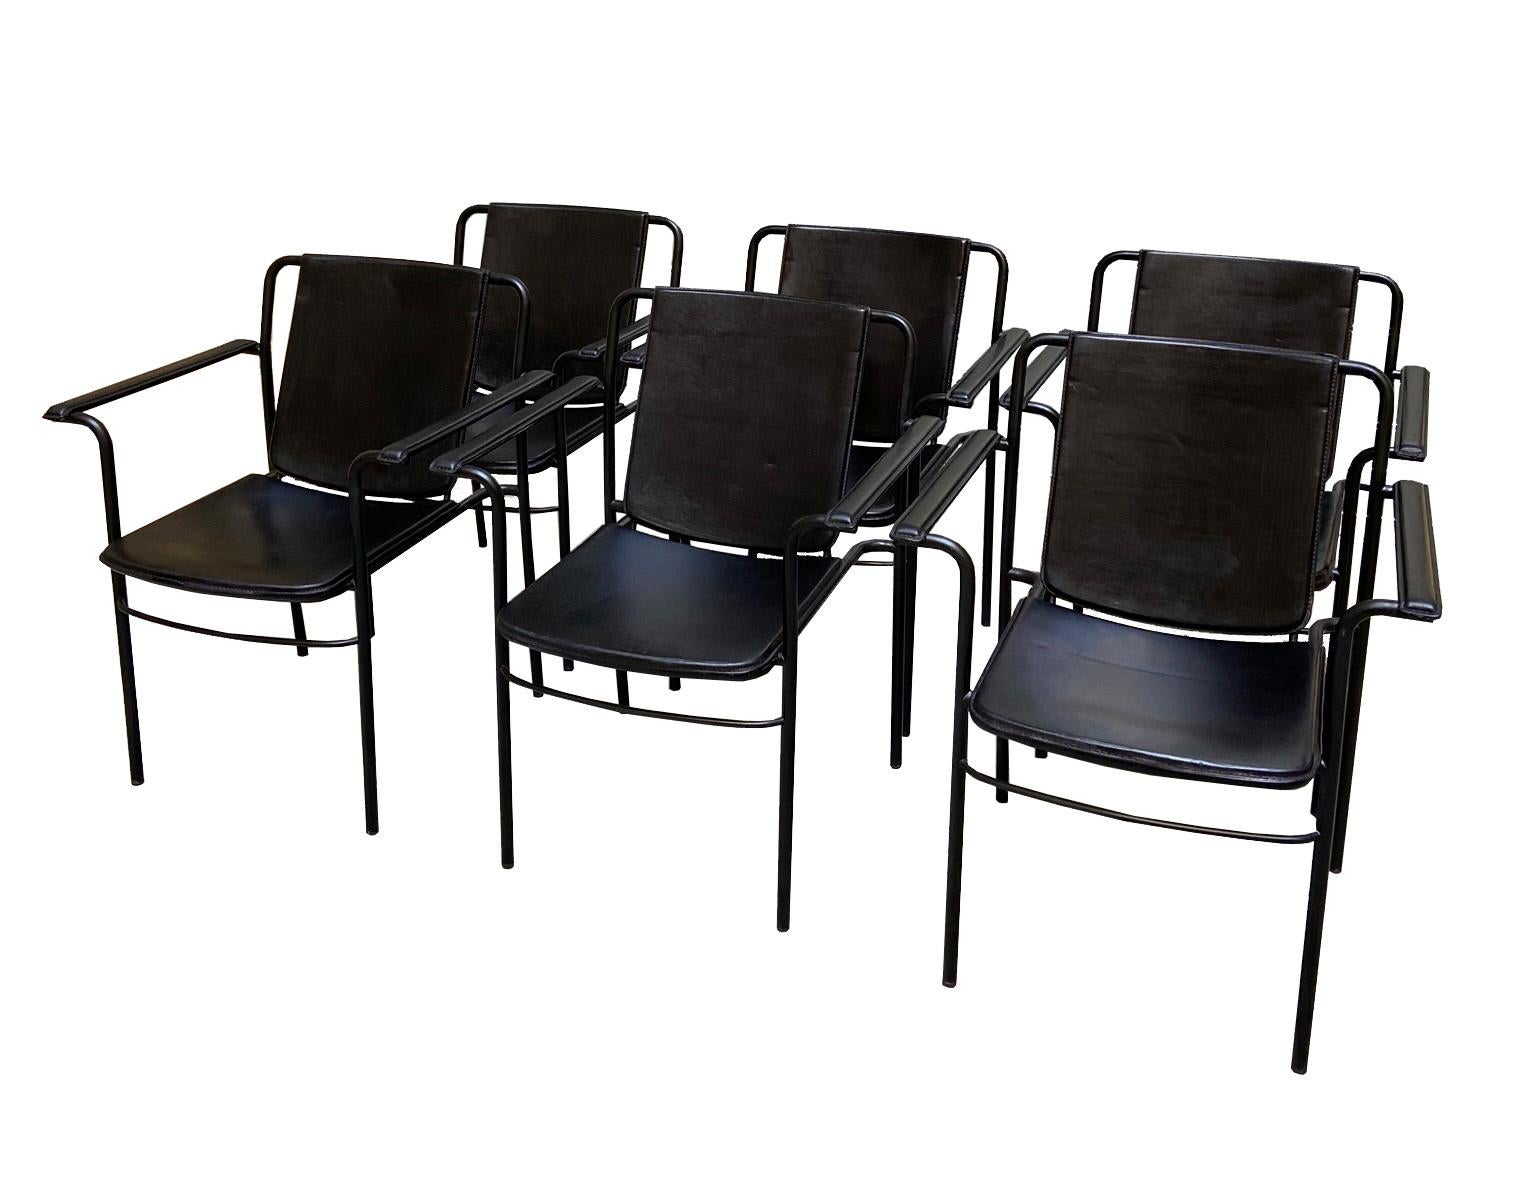 Mario Marenco for Poltrona Frau, set of six 'Movie' armchairs, metal and leather, Italy, 1984.

Set of six of Italian armchairs. The seat are padded and upholstered in black leather. The edges have a black finish. The tubular frame is made of